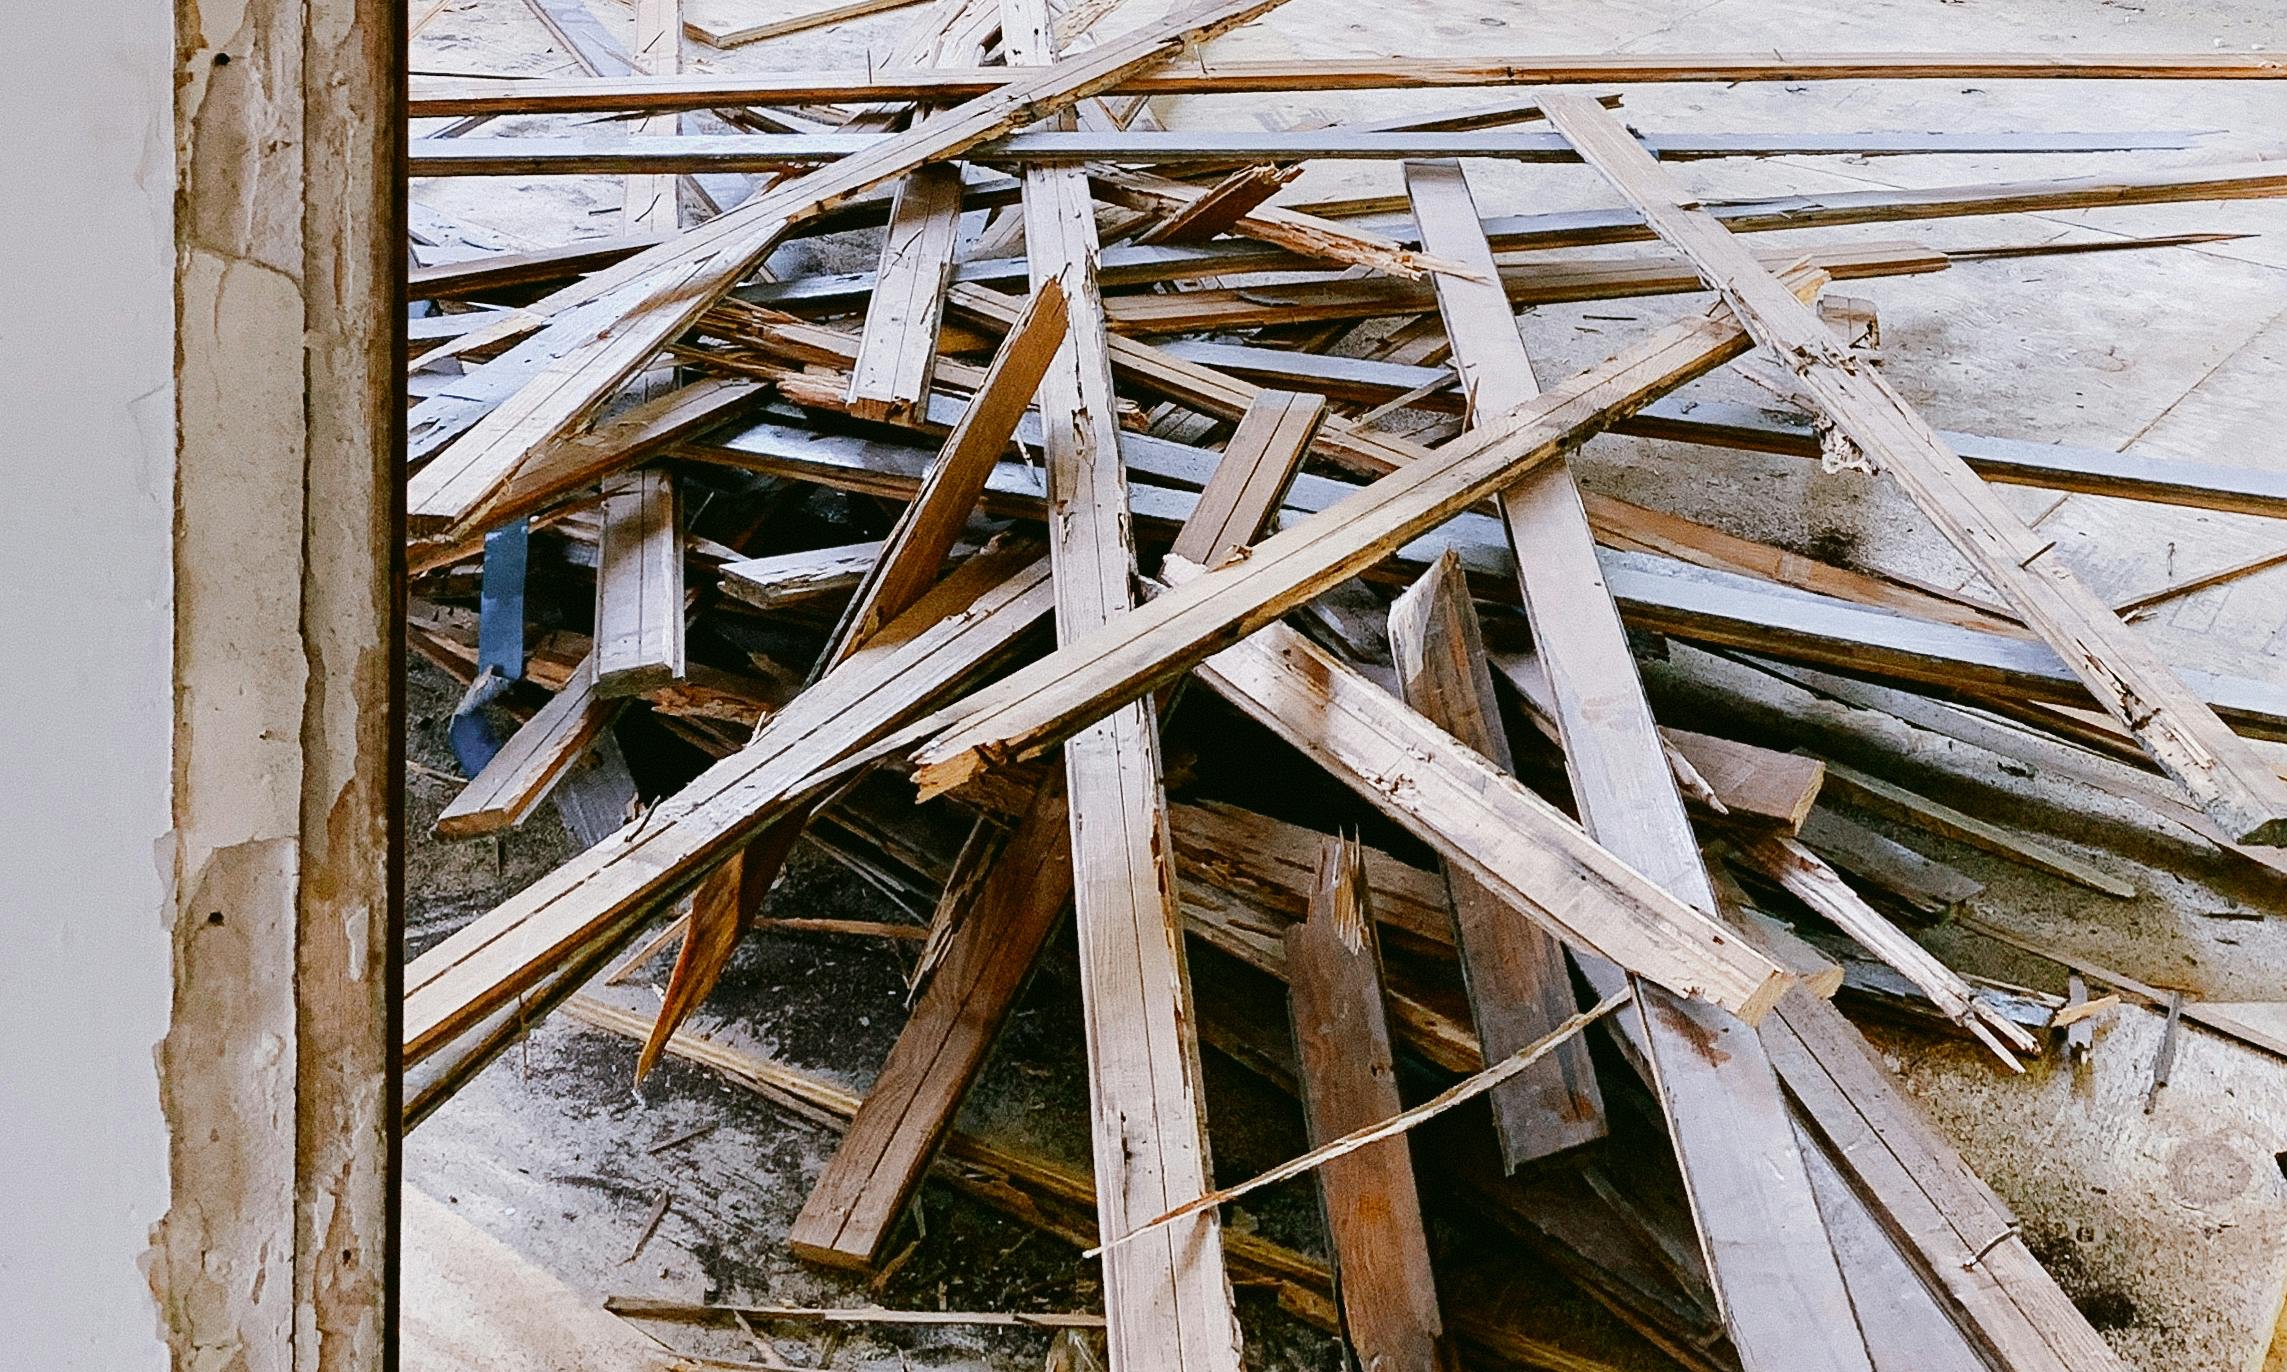 Strips of wood in a pile | Source: Pexels